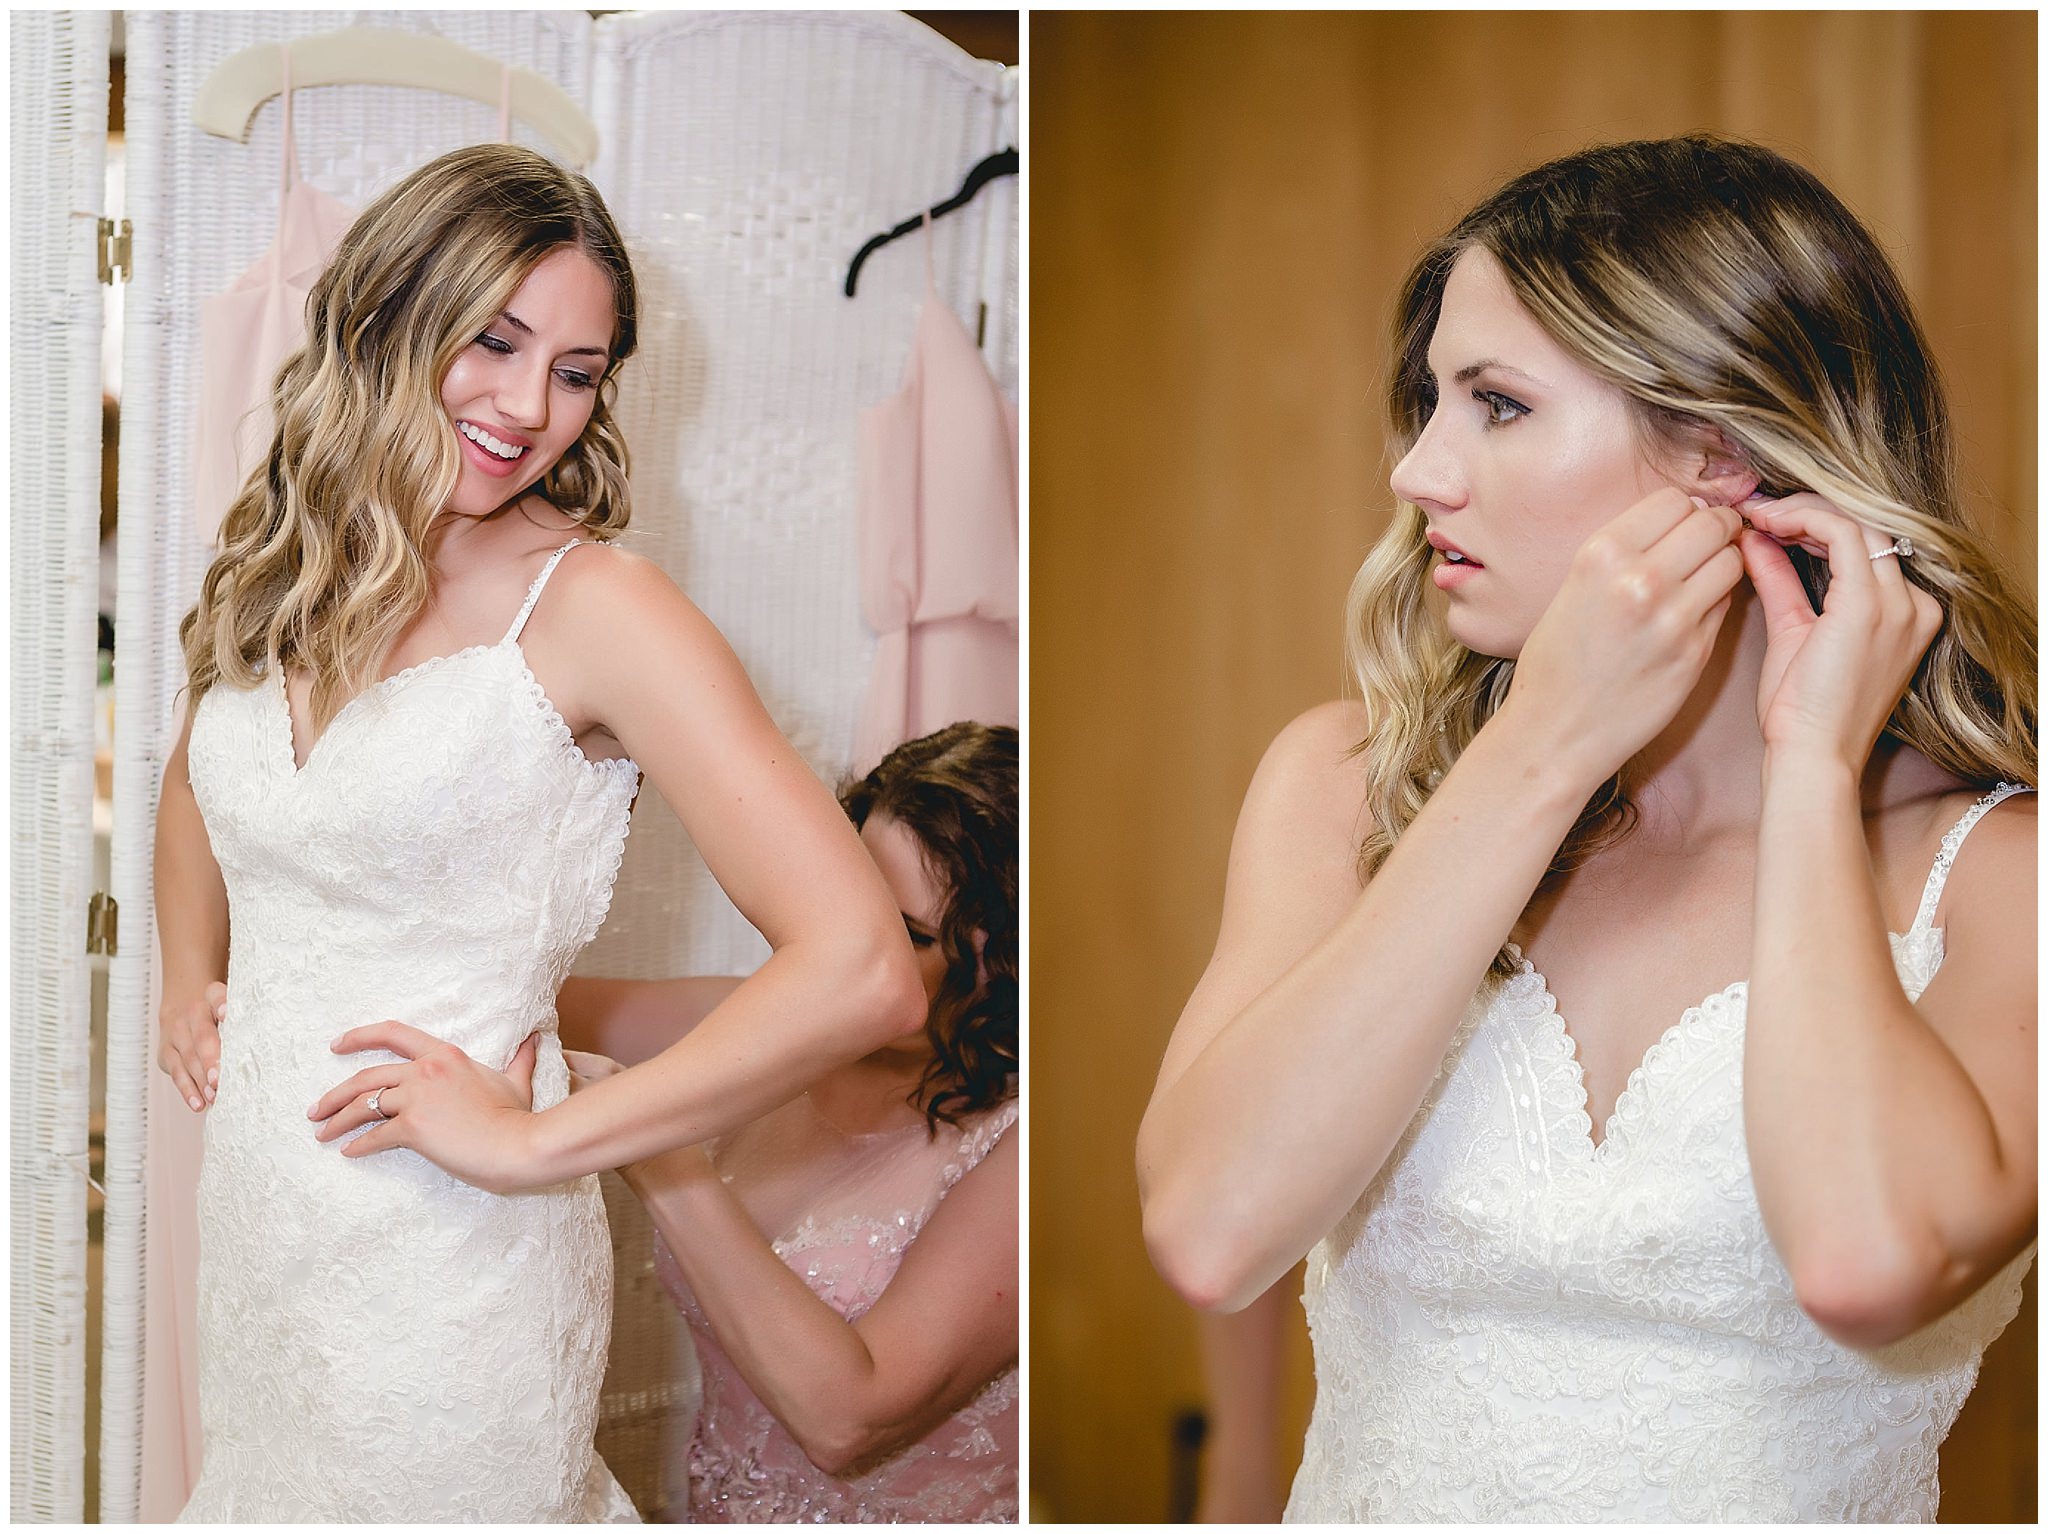 Bride gets into her wedding dress and puts on her earrings at Hidden Valley Resort